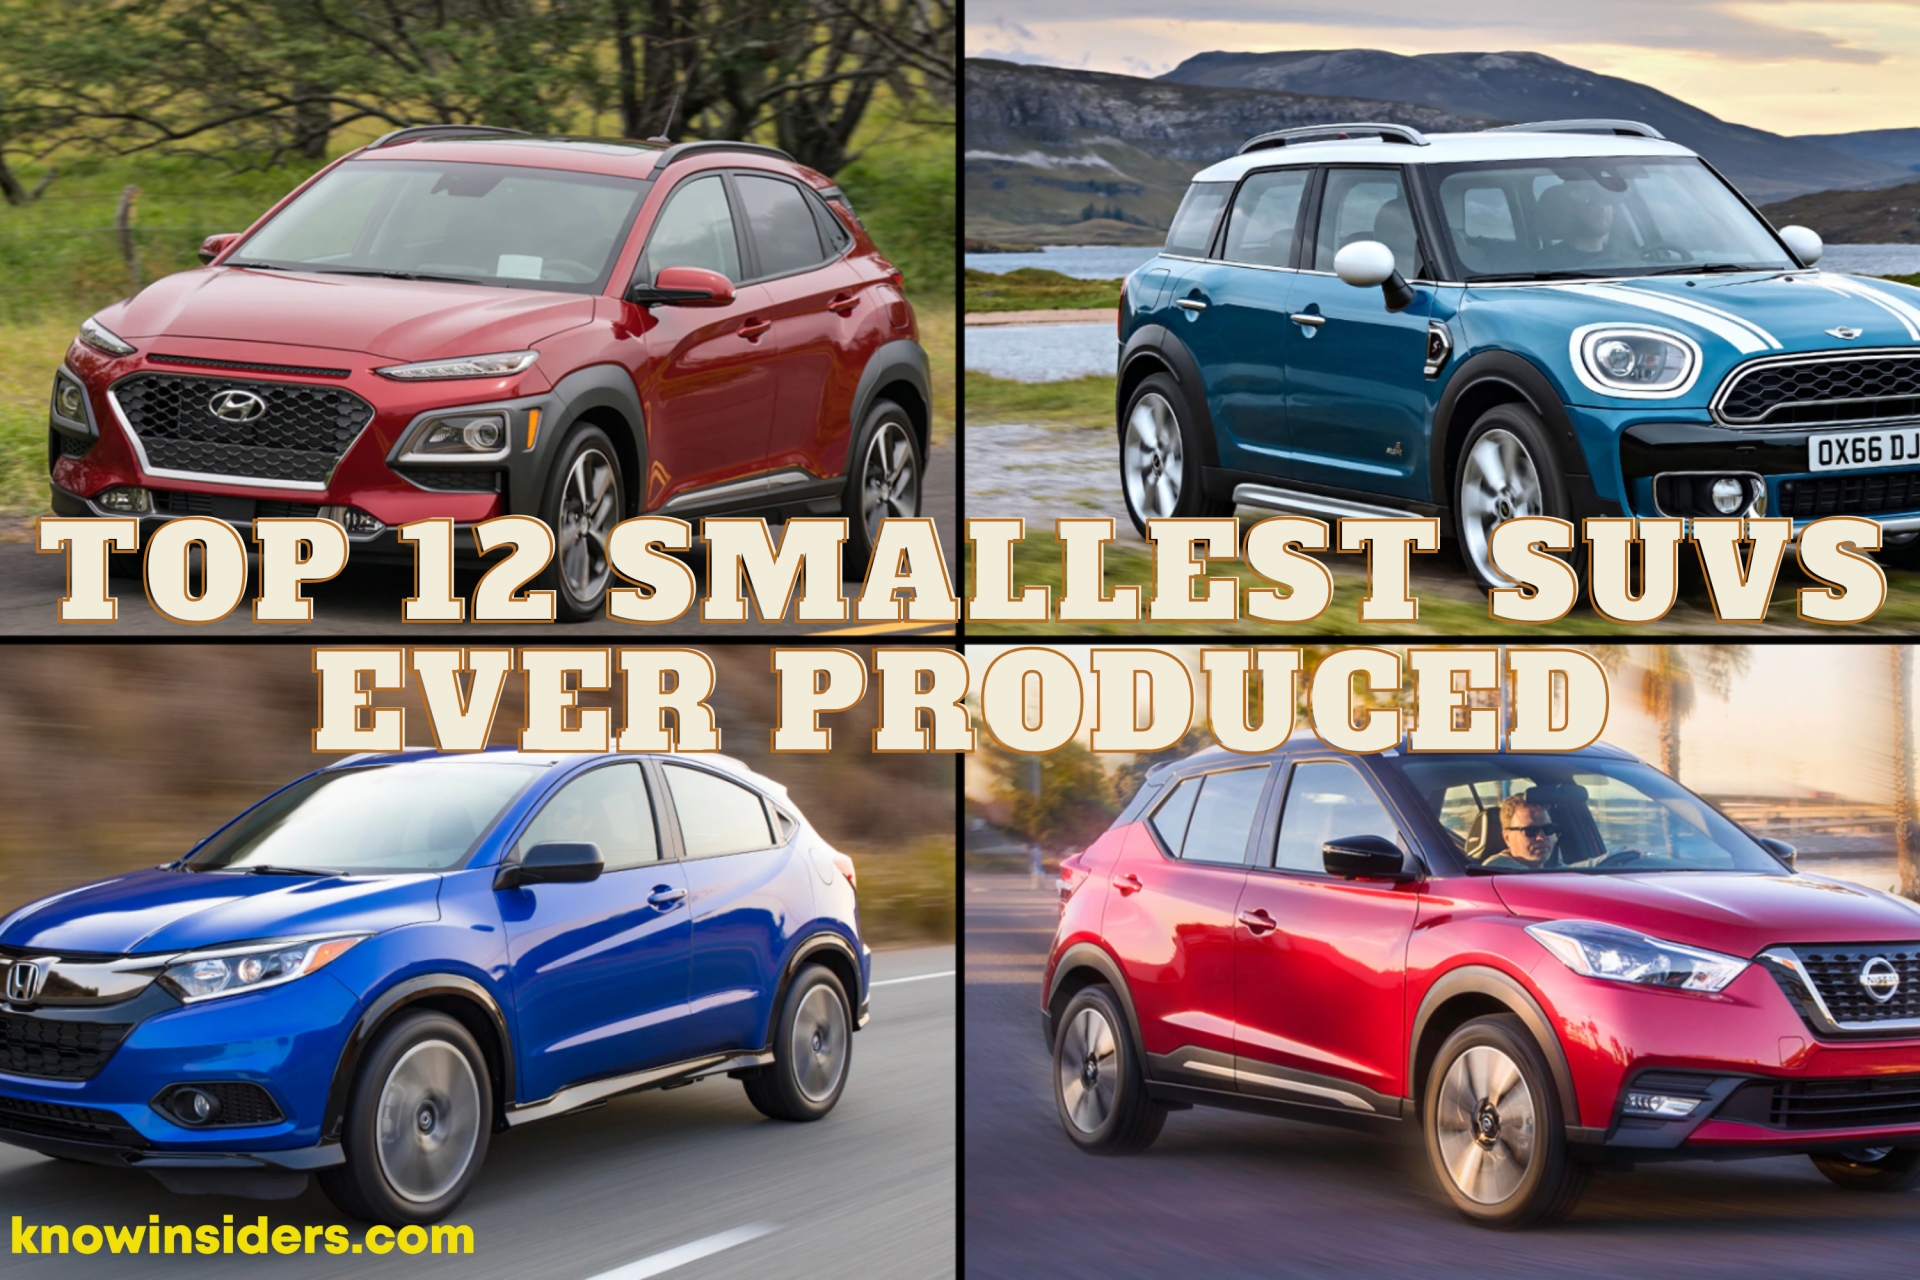 Top 12 Smallest SUVs in the World